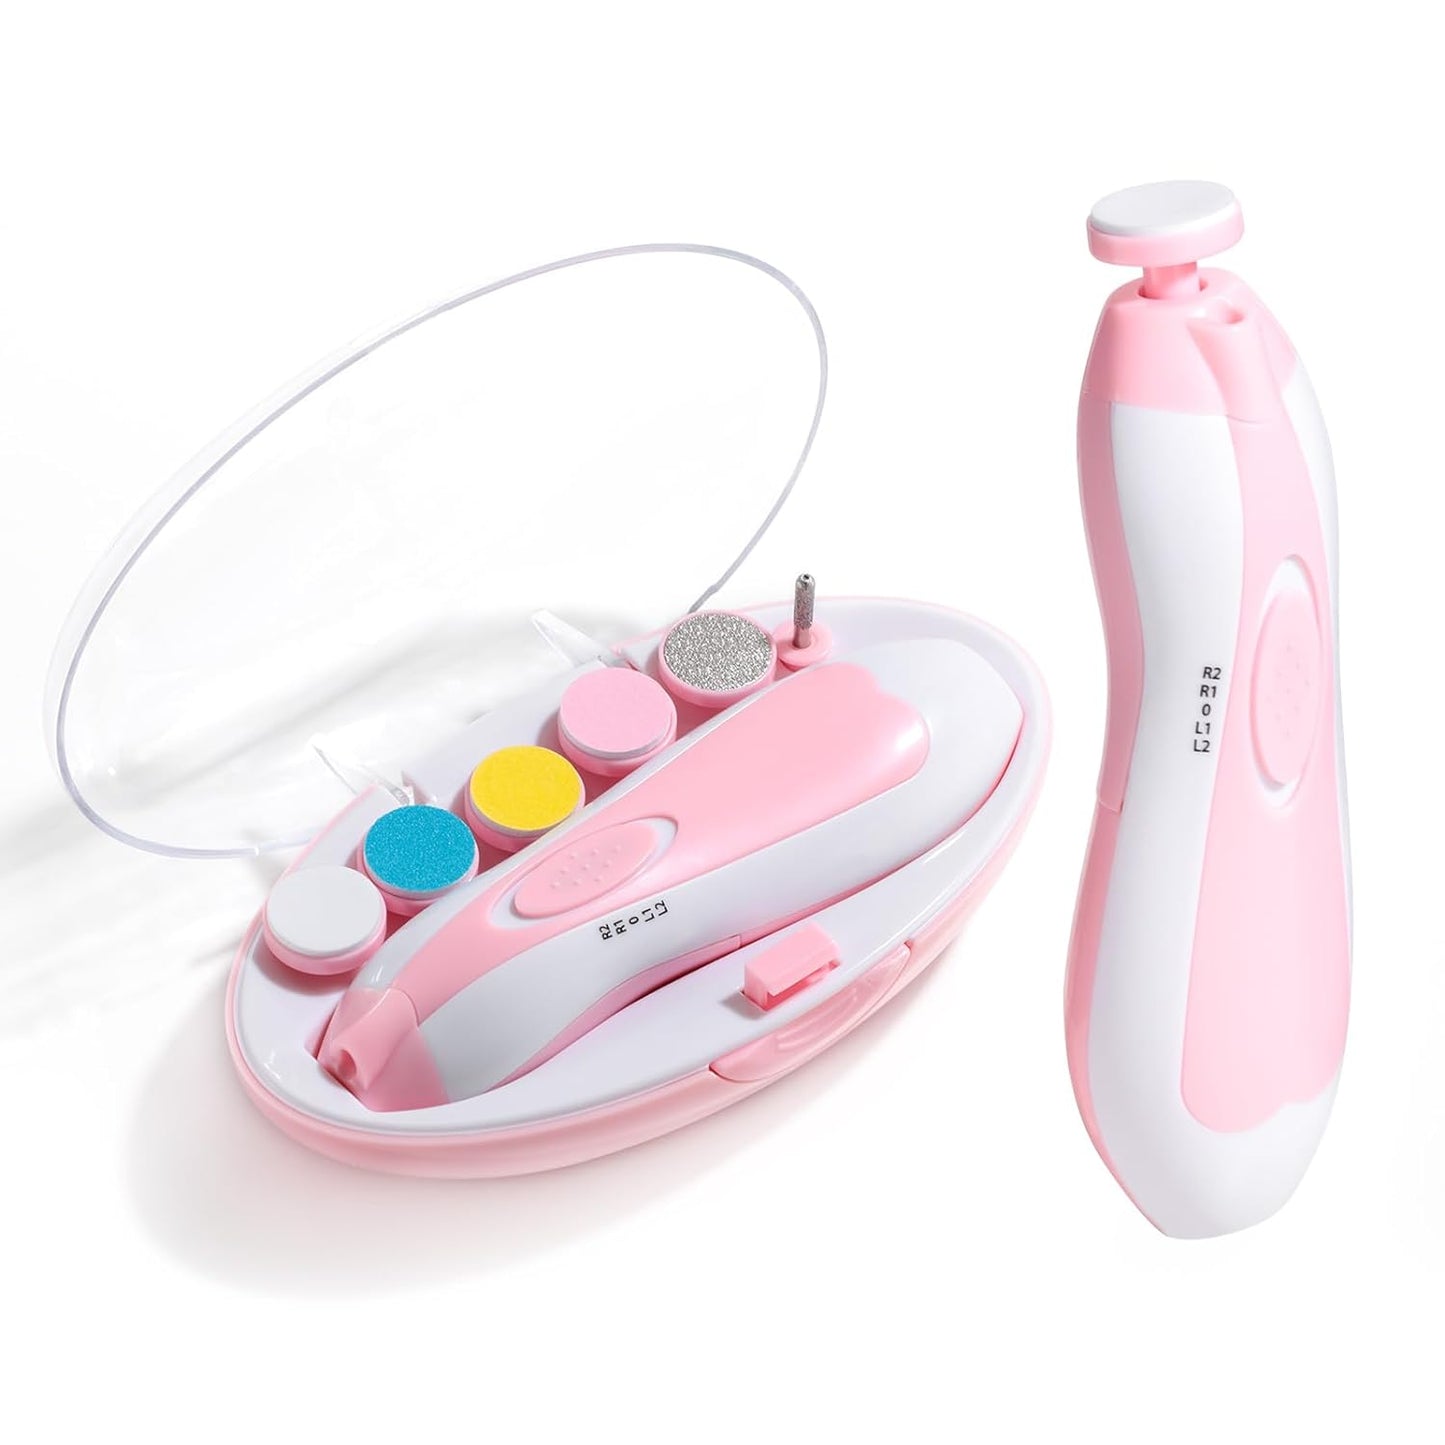 Baby Nail Trimmer 6 in 1 - A Safe Electric Trimmer for Baby Nails